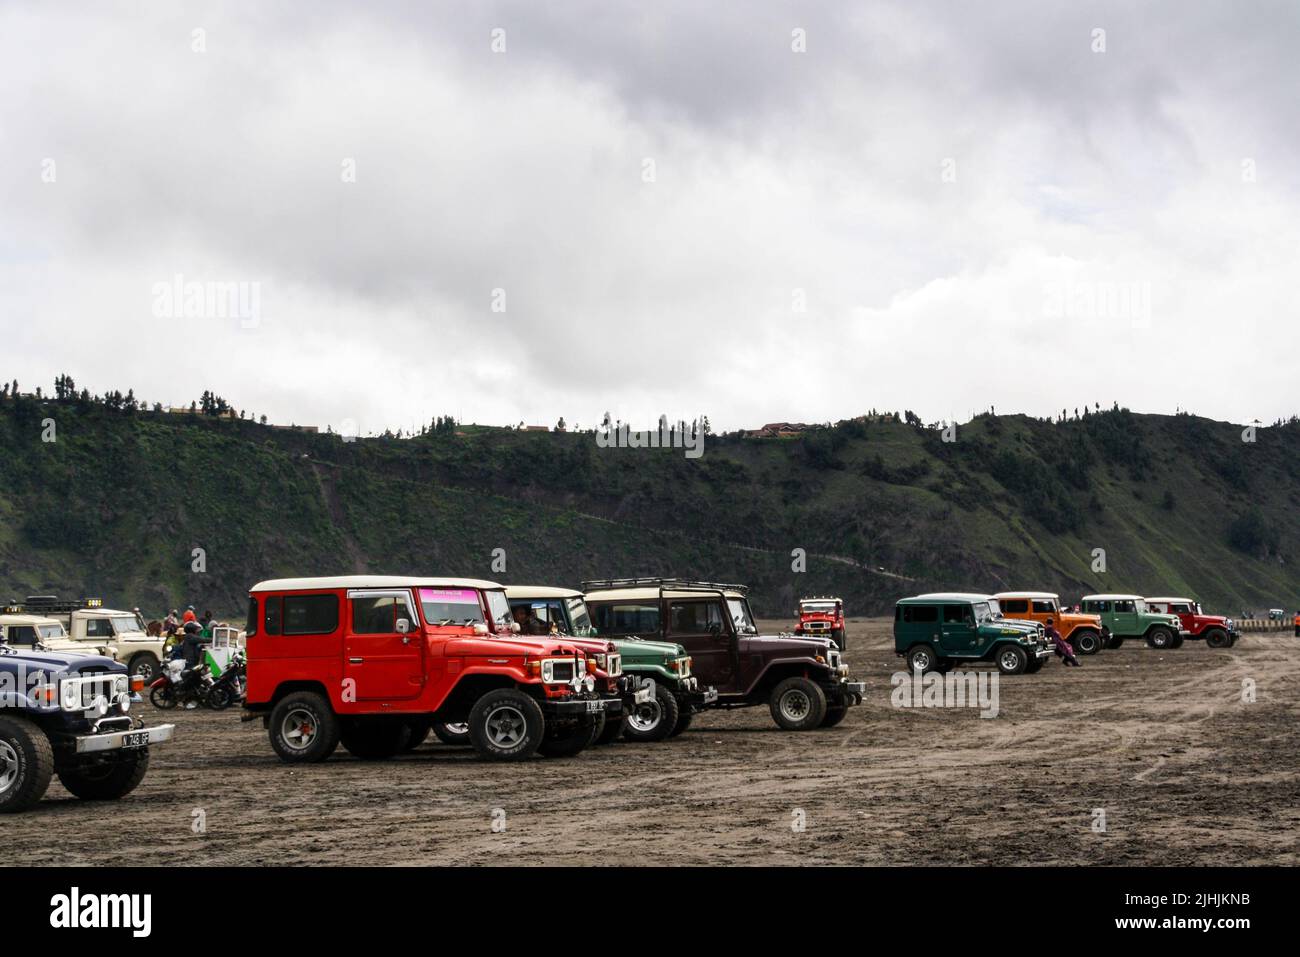 Vintage Japanese jeep parking in line for tourist transport at Mount Bromo in the Tengger Semeru National Park with cloudy sky background. Stock Photo